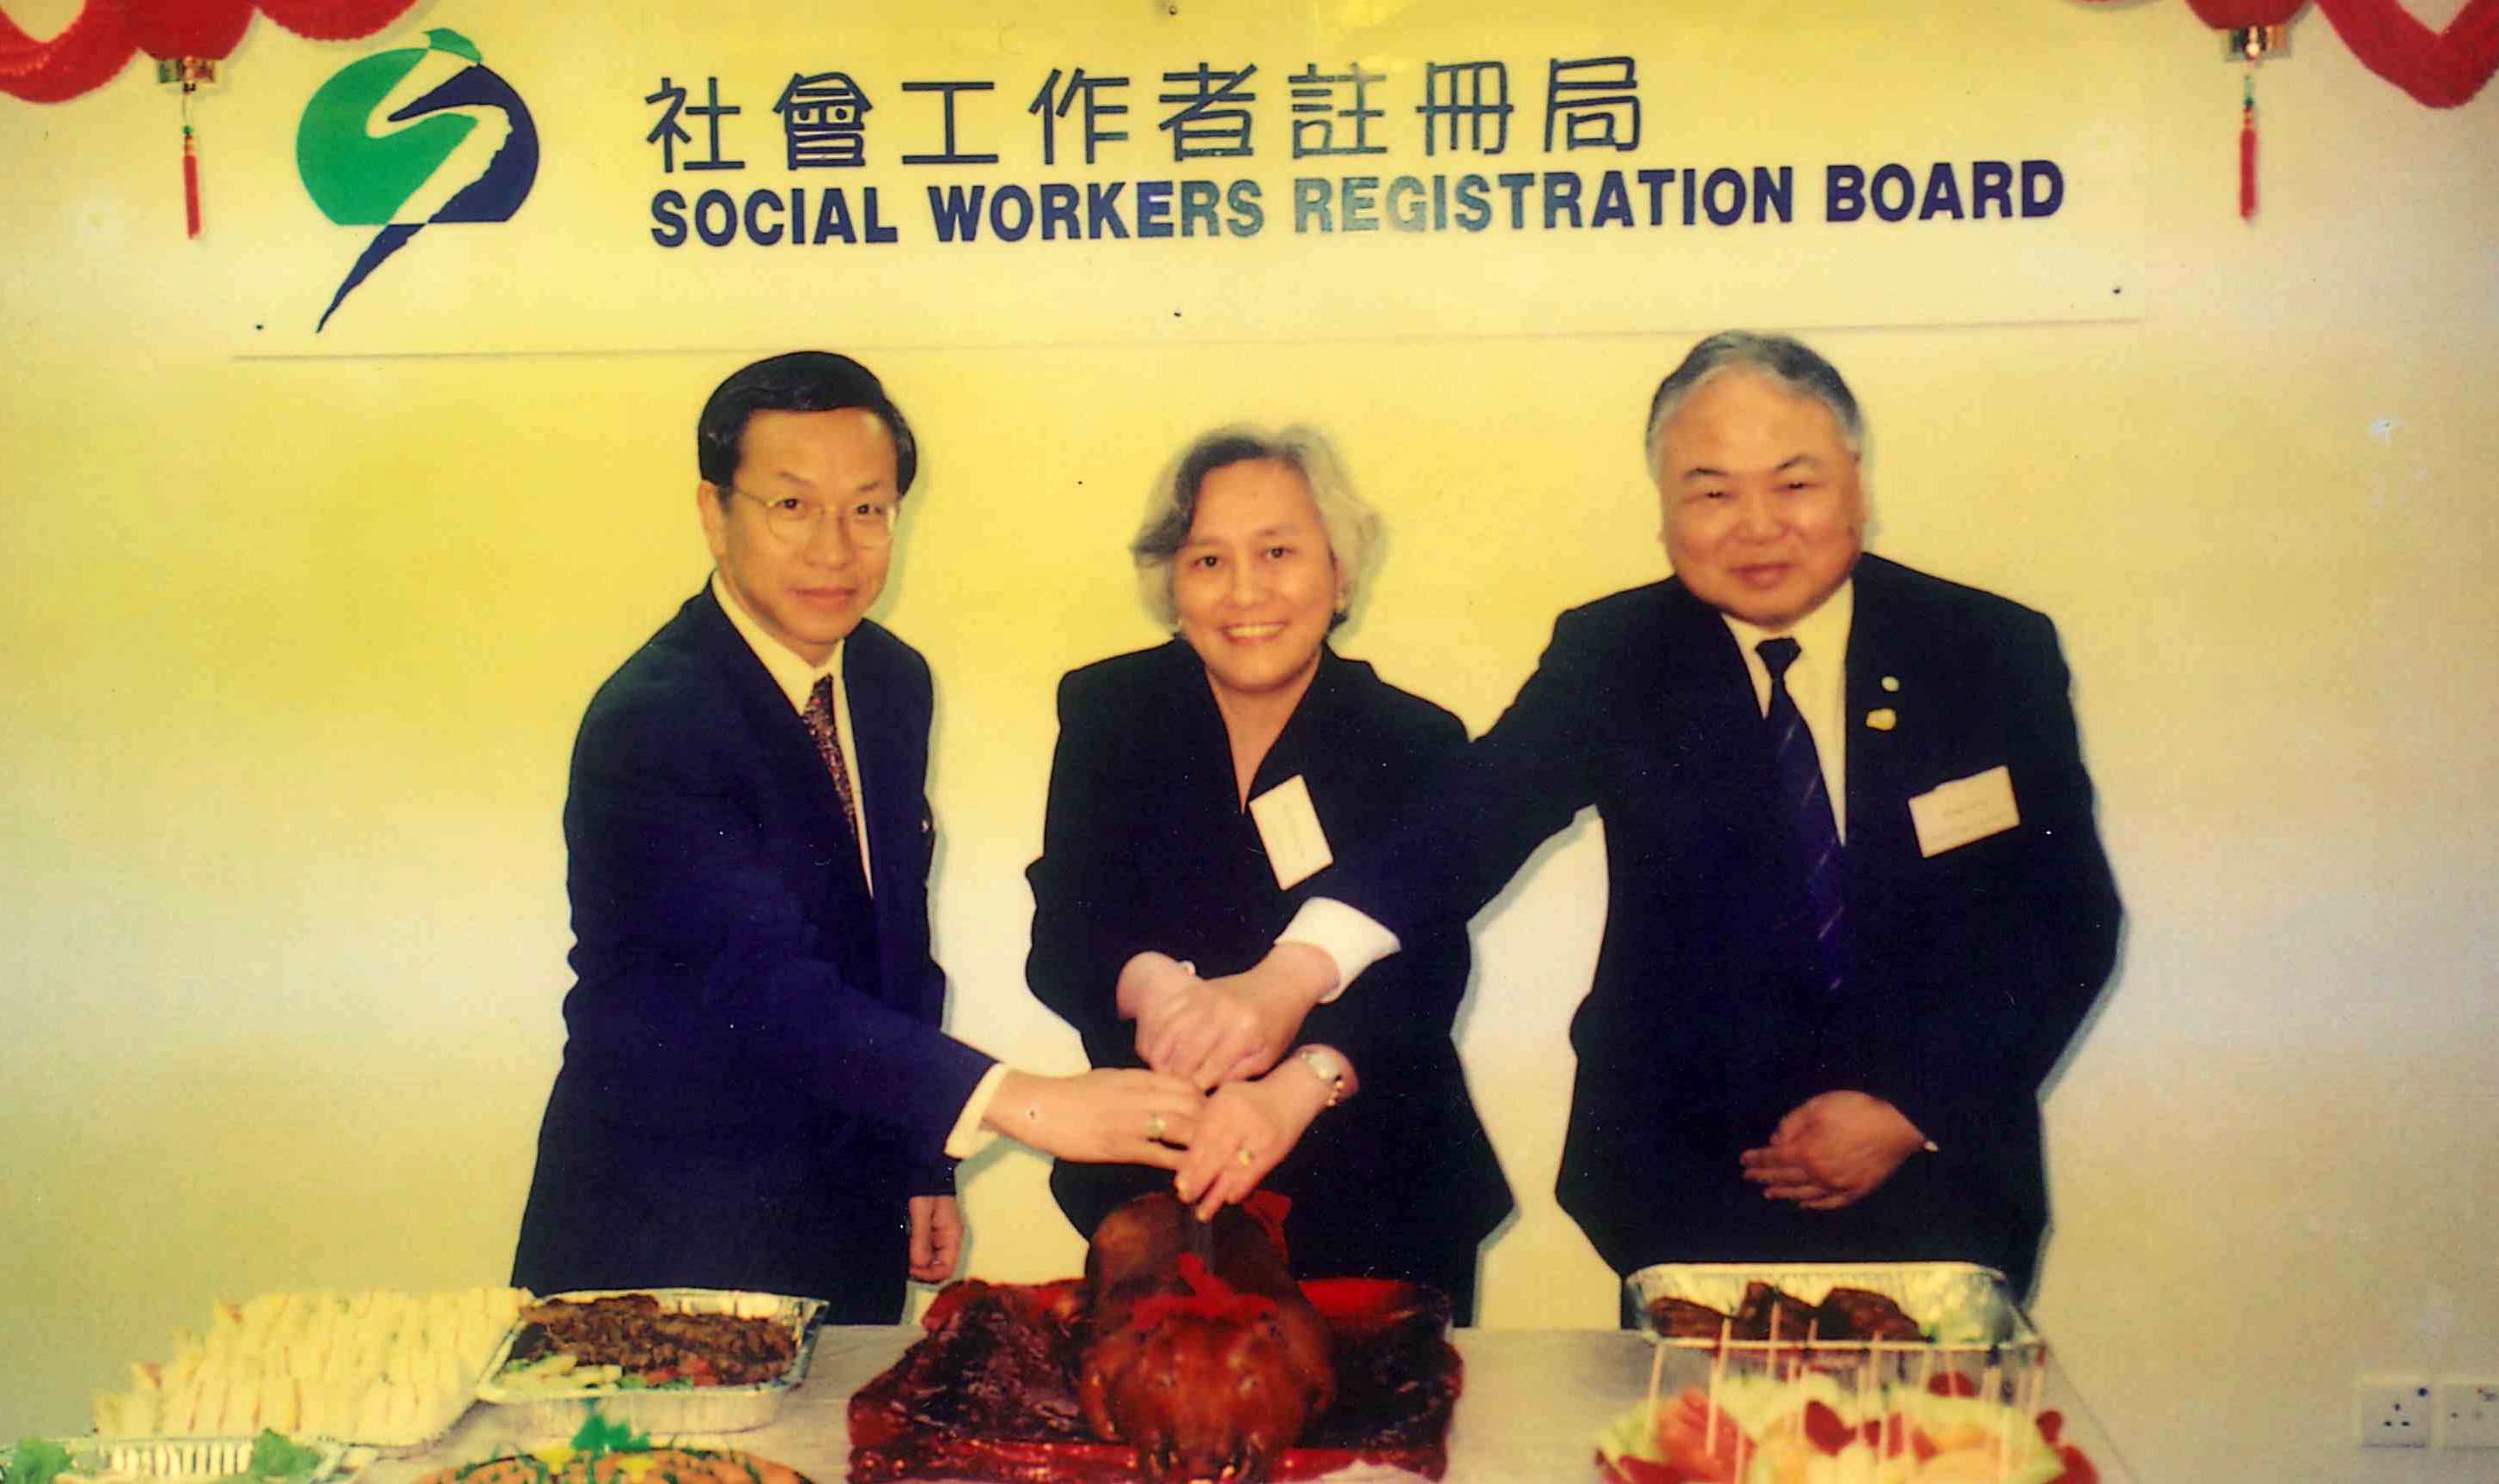 Mr. Hui Yin-fat was the officiating guest for the opening ceremony of the office of the Board.